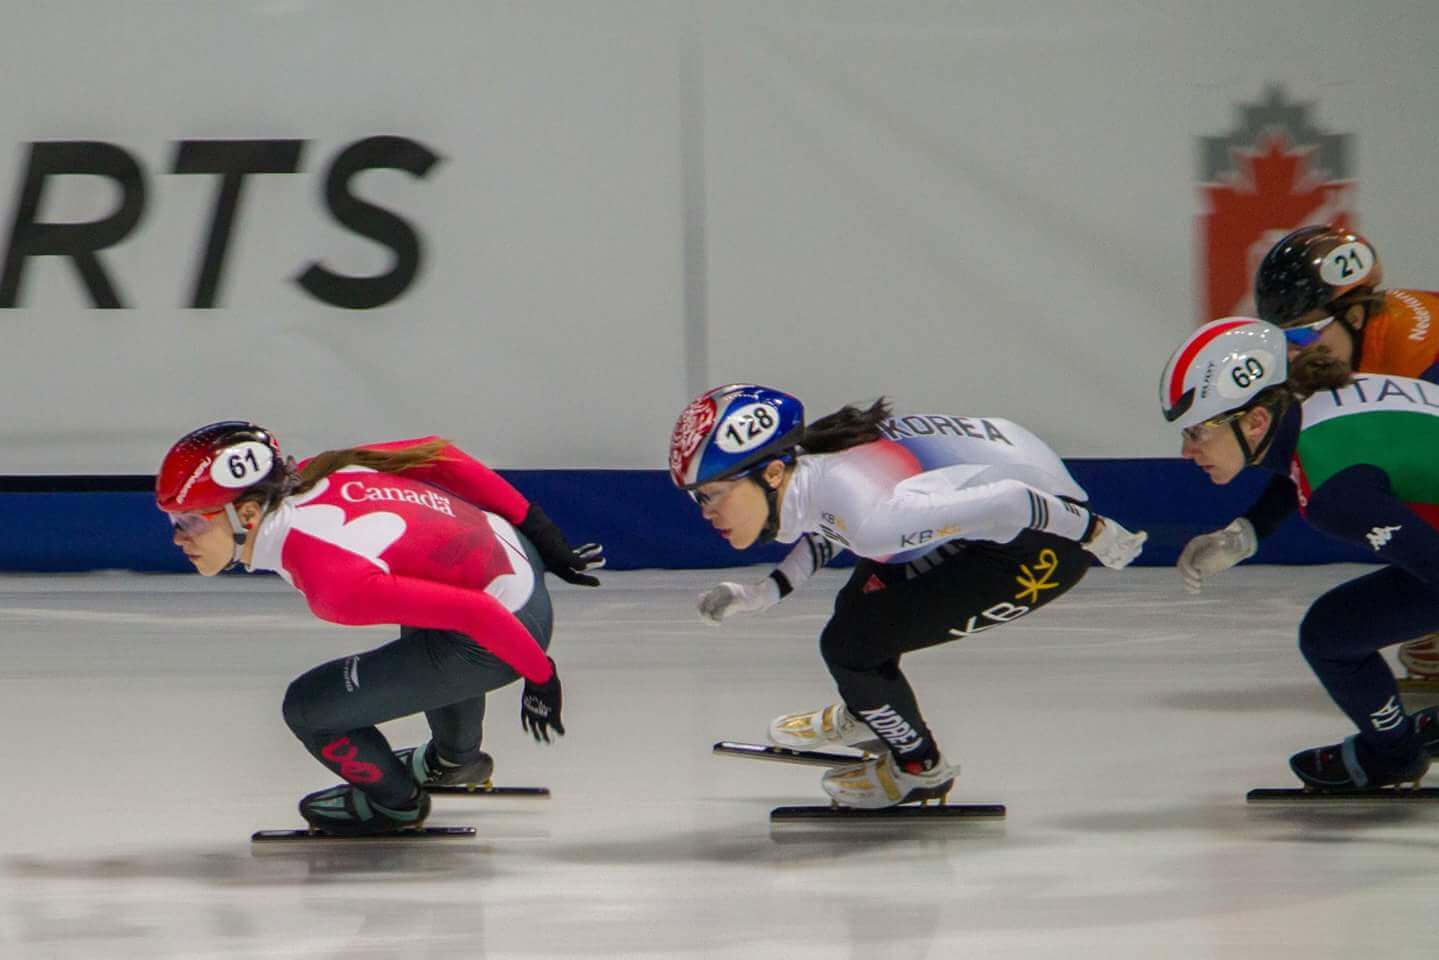 Kasandra Bradette in the middle of a speed skating competition